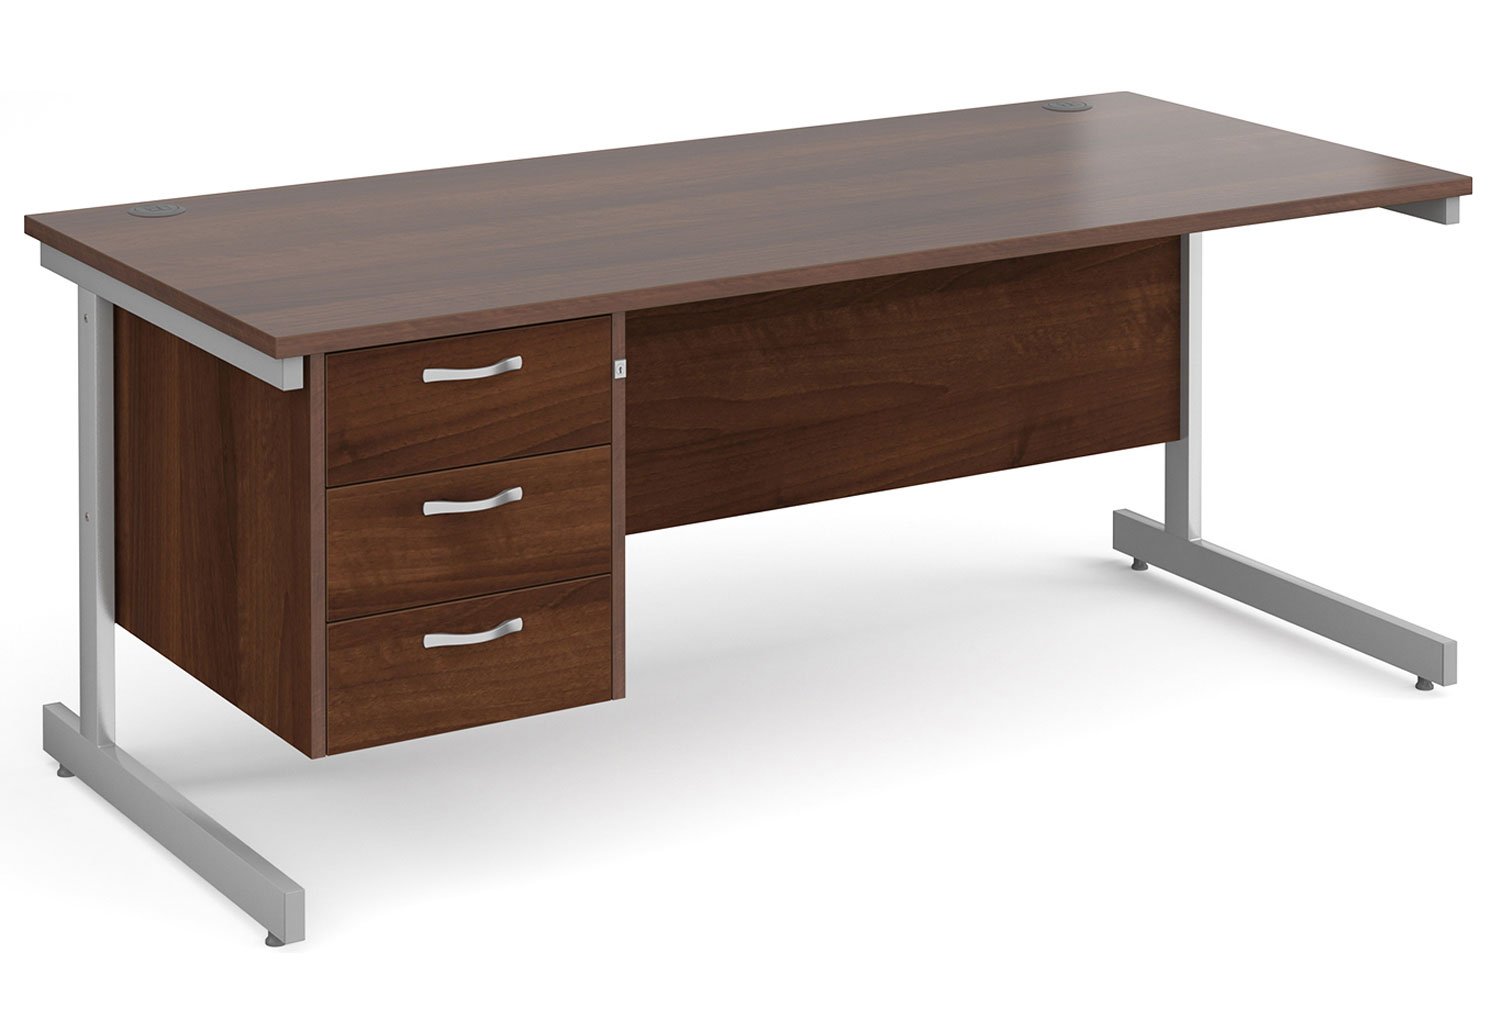 All Walnut C-Leg Clerical Office Desk 3 Drawer, 180wx80dx73h (cm), Express Delivery